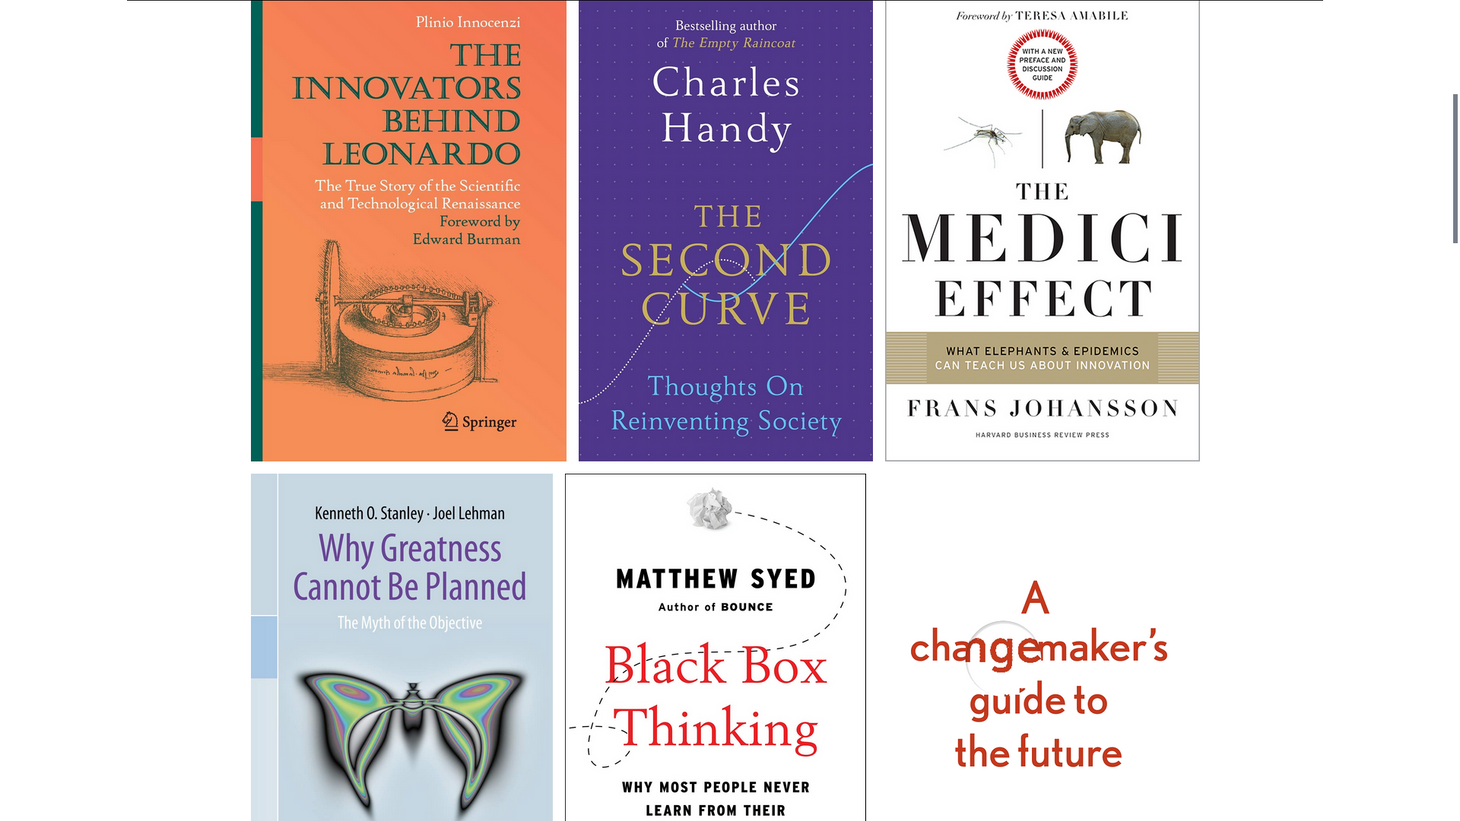 Crowdsourced innovation book recommendations